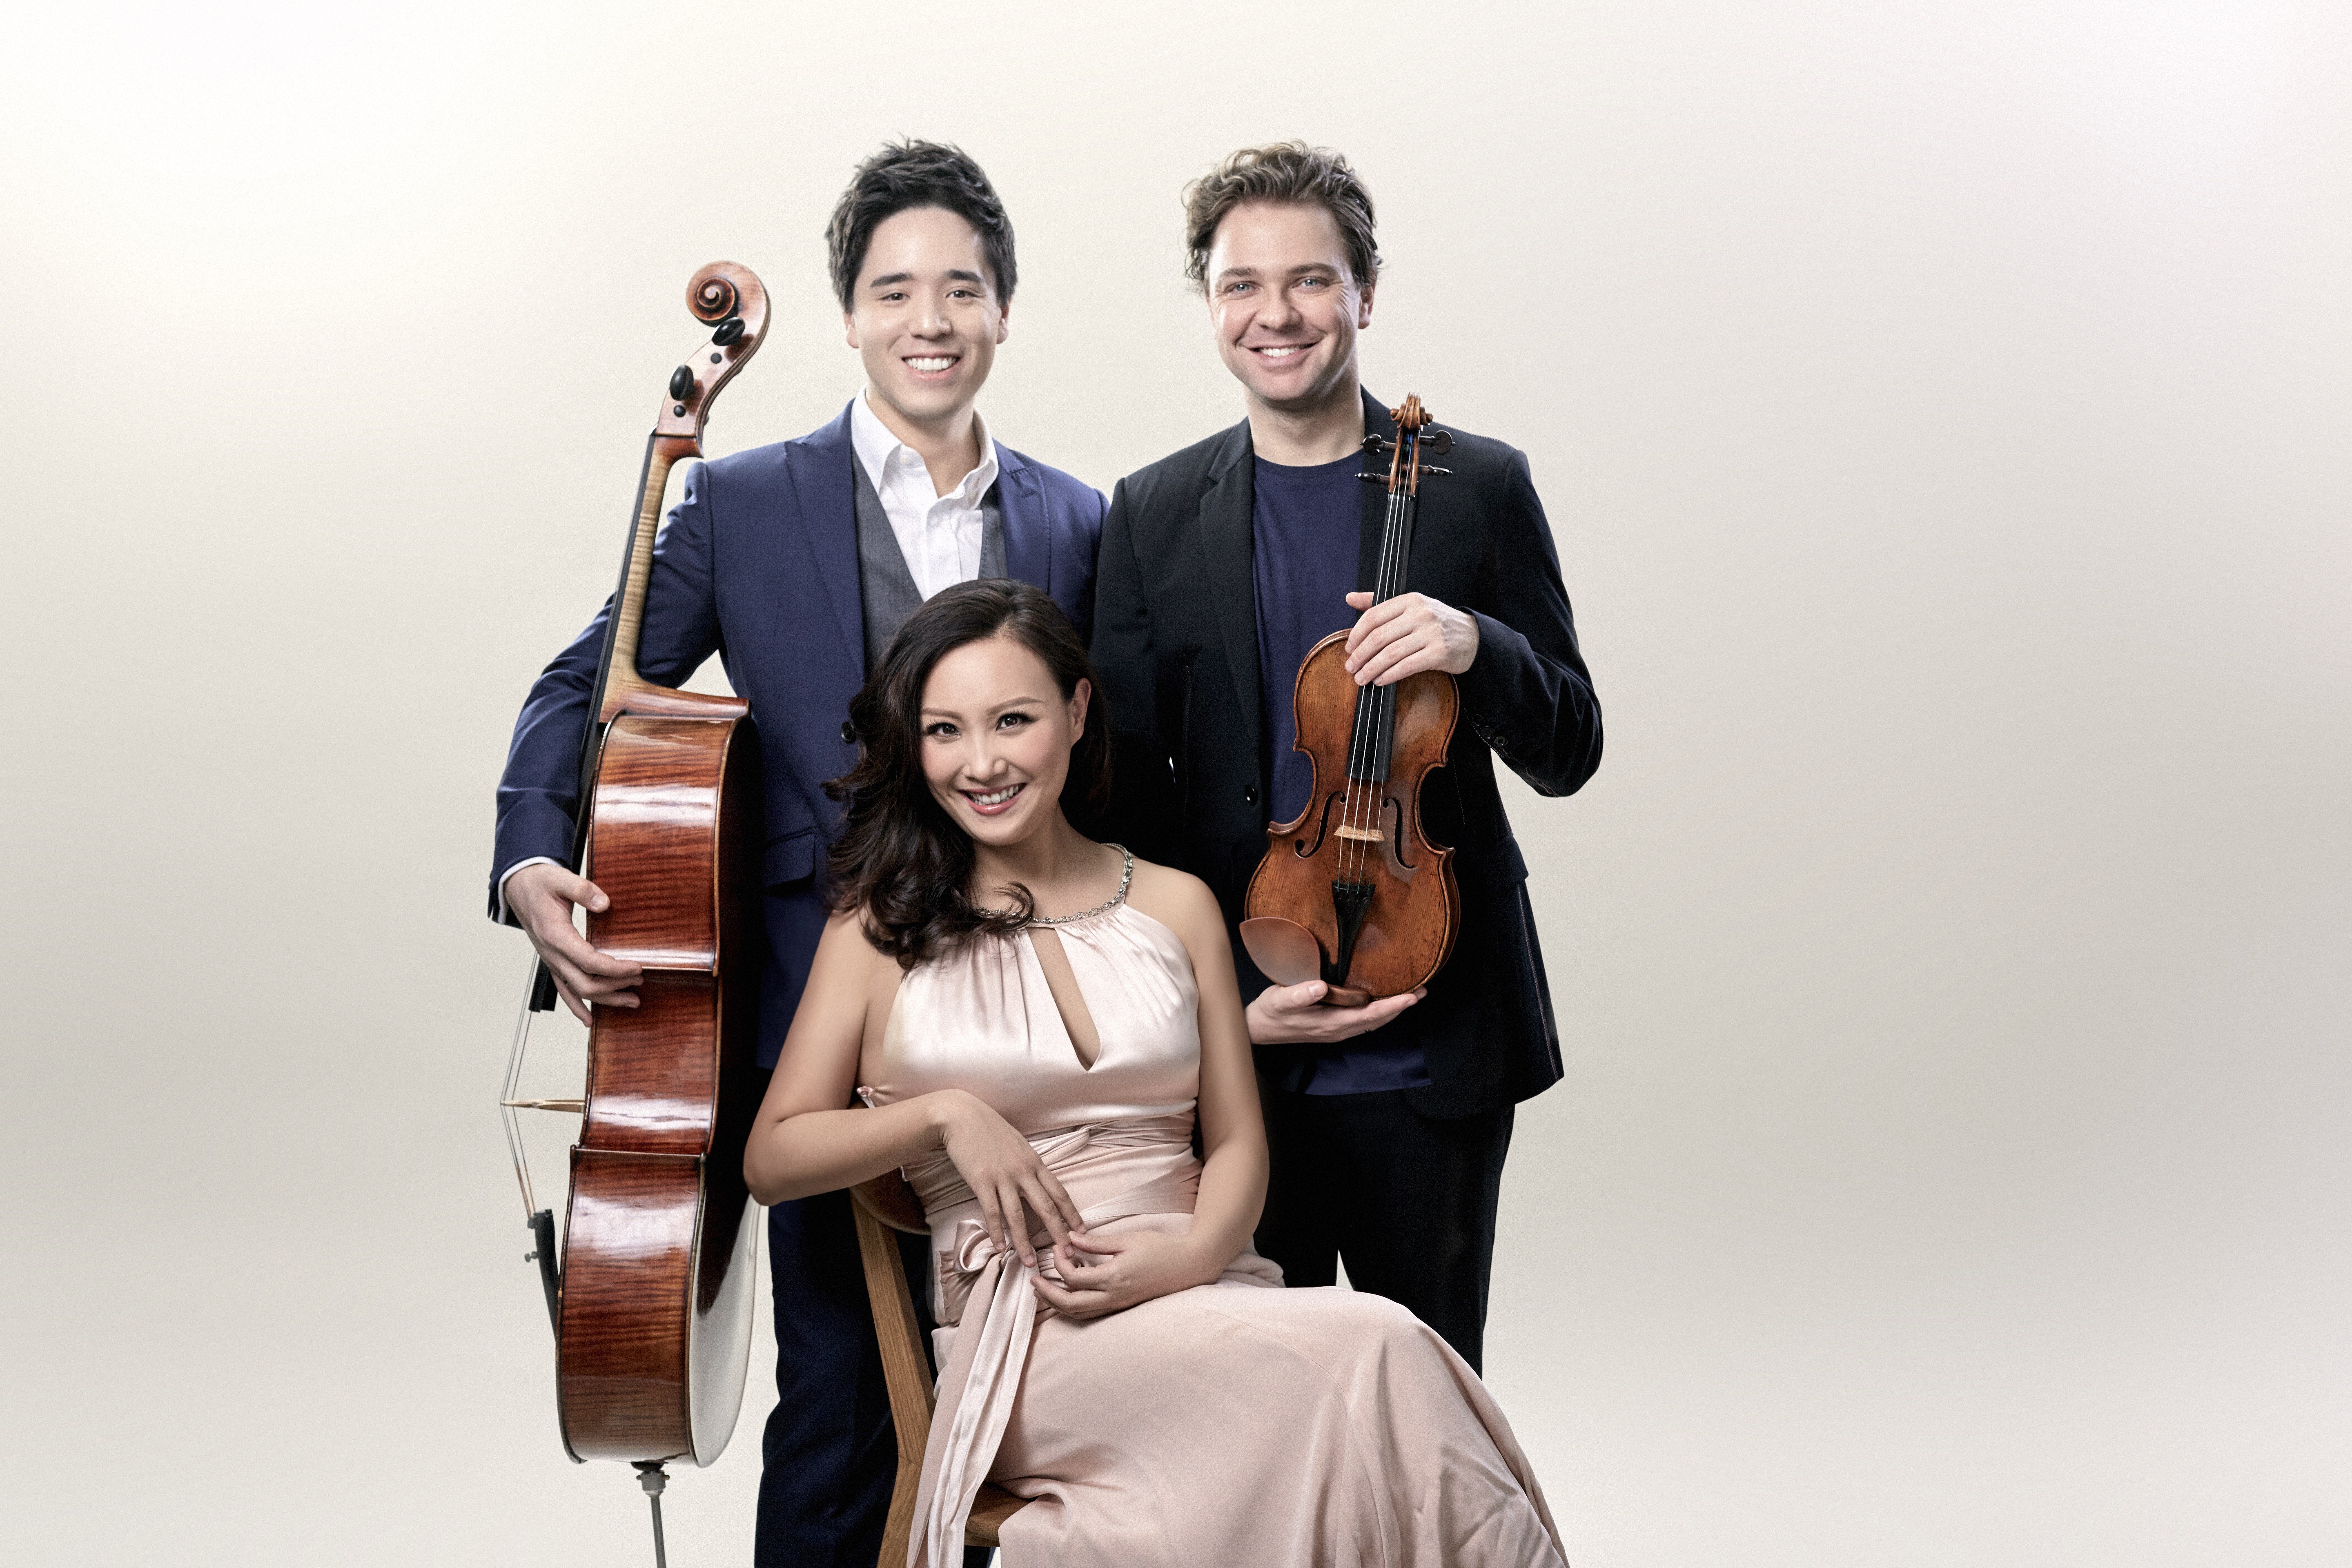 Hong Kong classical music fans will hear the Sitkovetsky Trio – Isang Enders (left), Wu Qian and Alexander Sitkovetsky, the latter husband and wife – play two concerts next week. Photo: The Sitkovetsky Trio